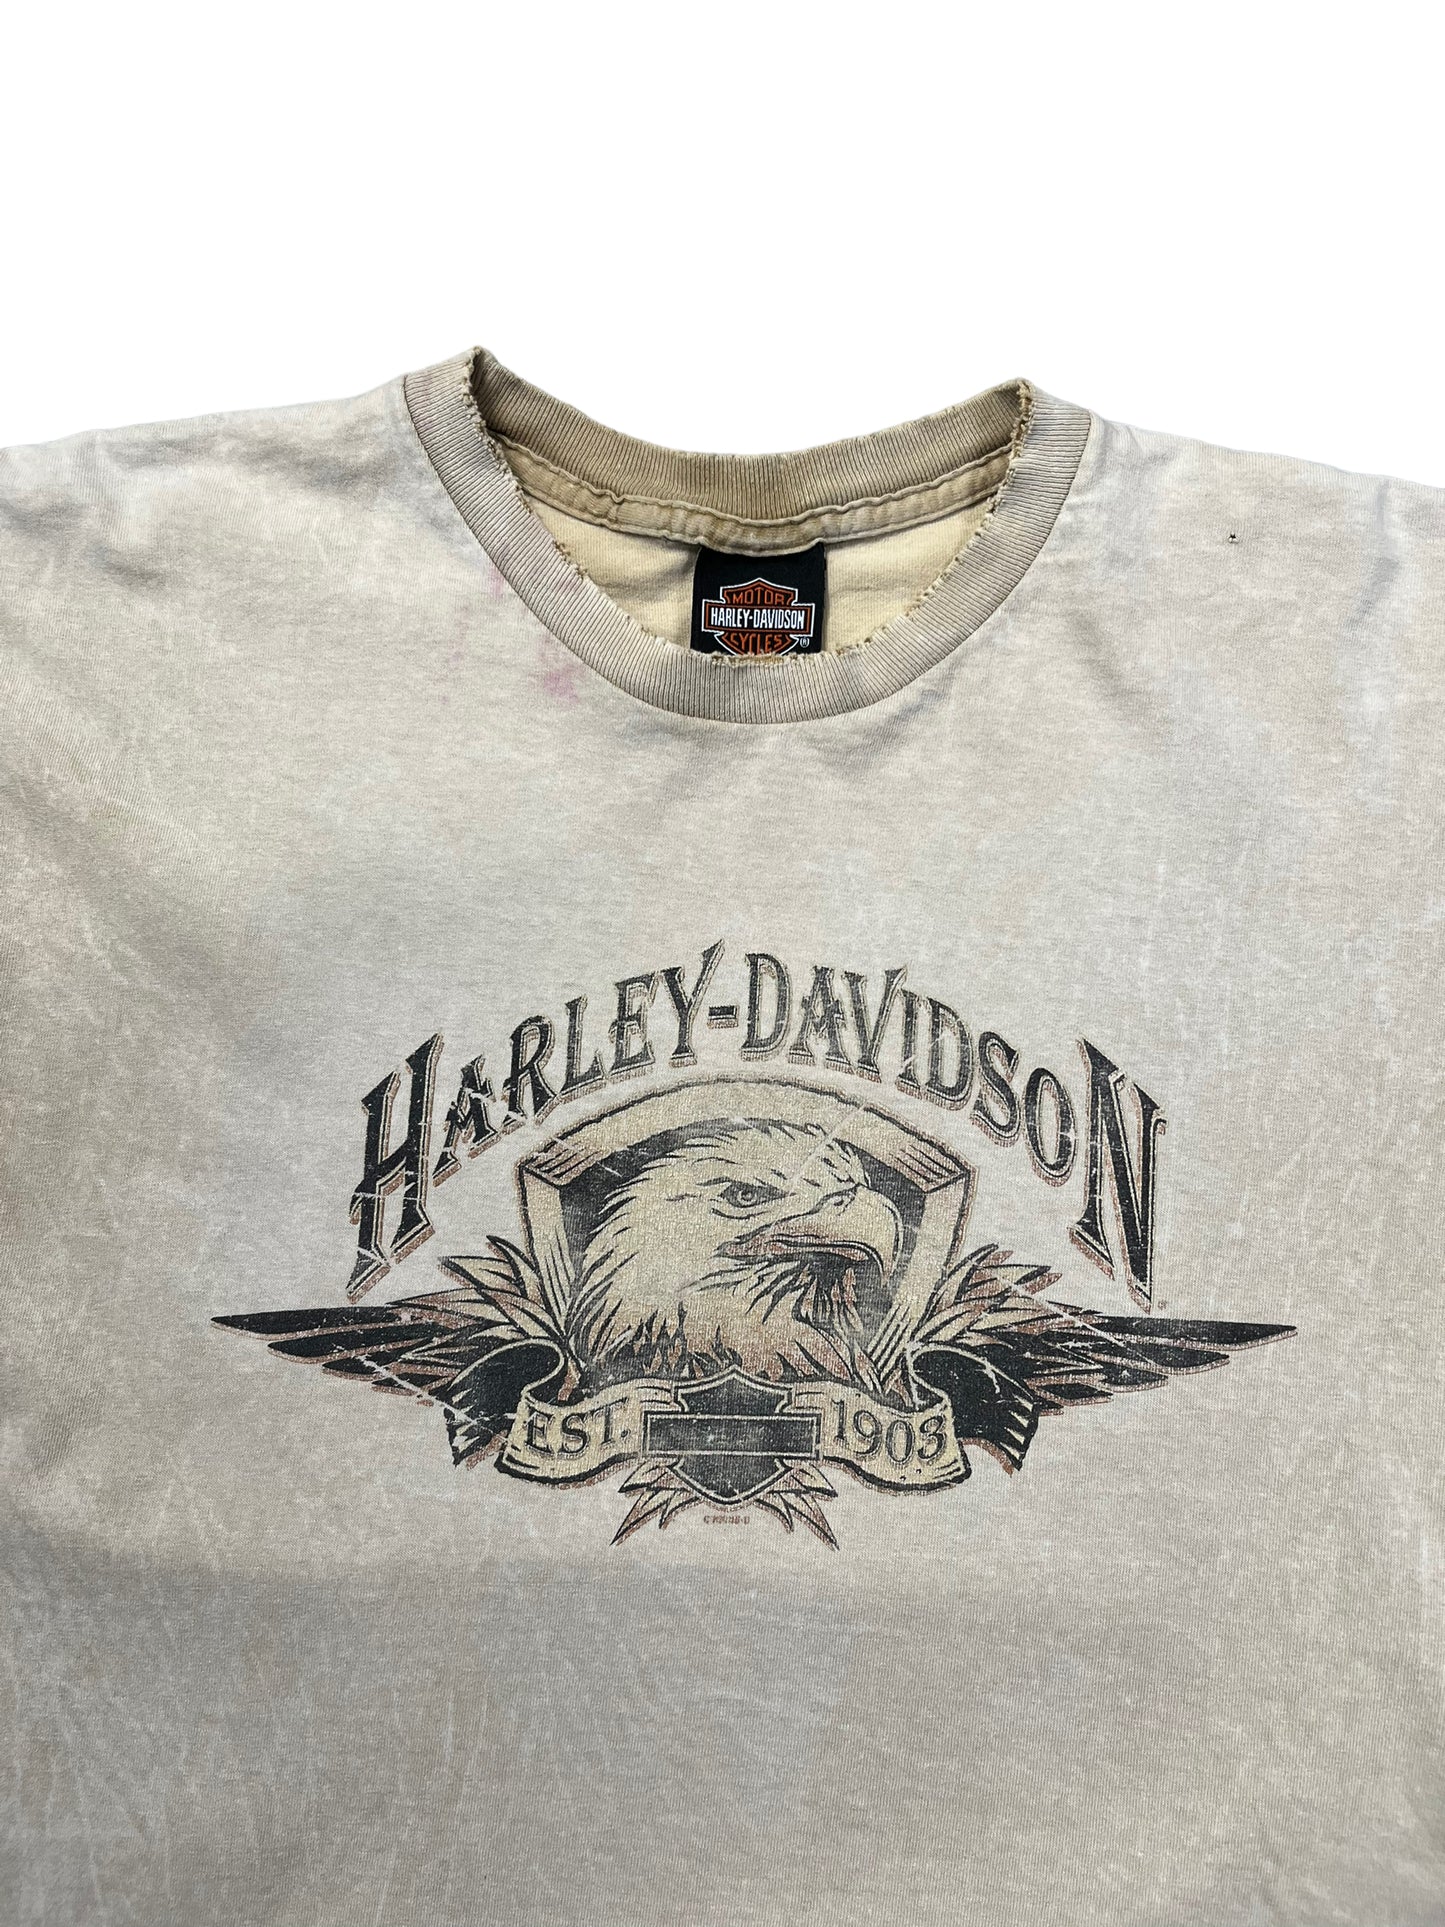 (M) 2003 Harley Davidson Canfield, Ohio Double Sided Tee